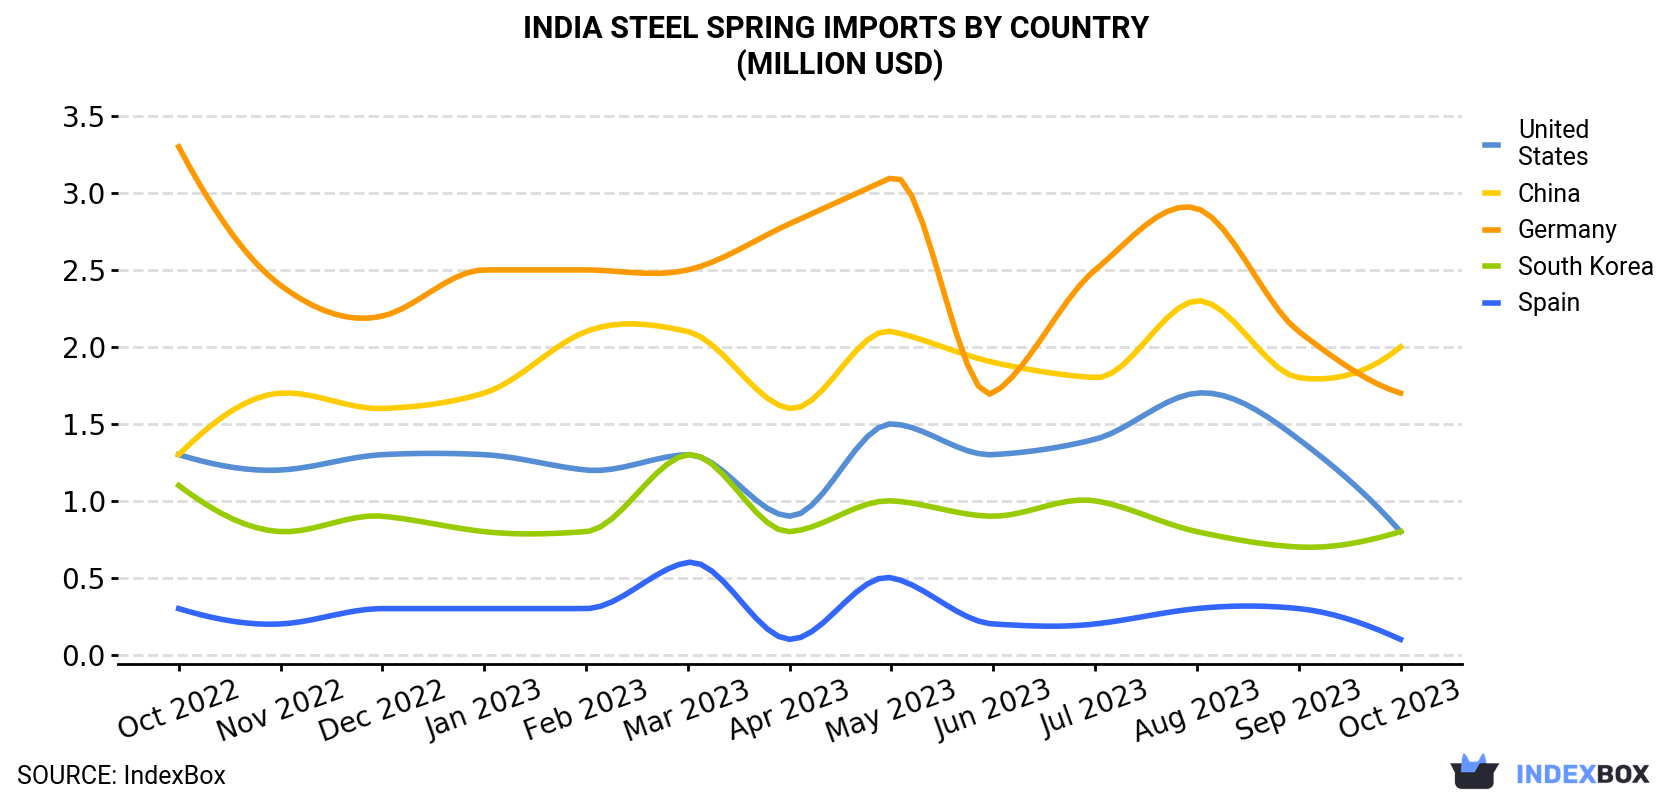 India Steel Spring Imports By Country (Million USD)